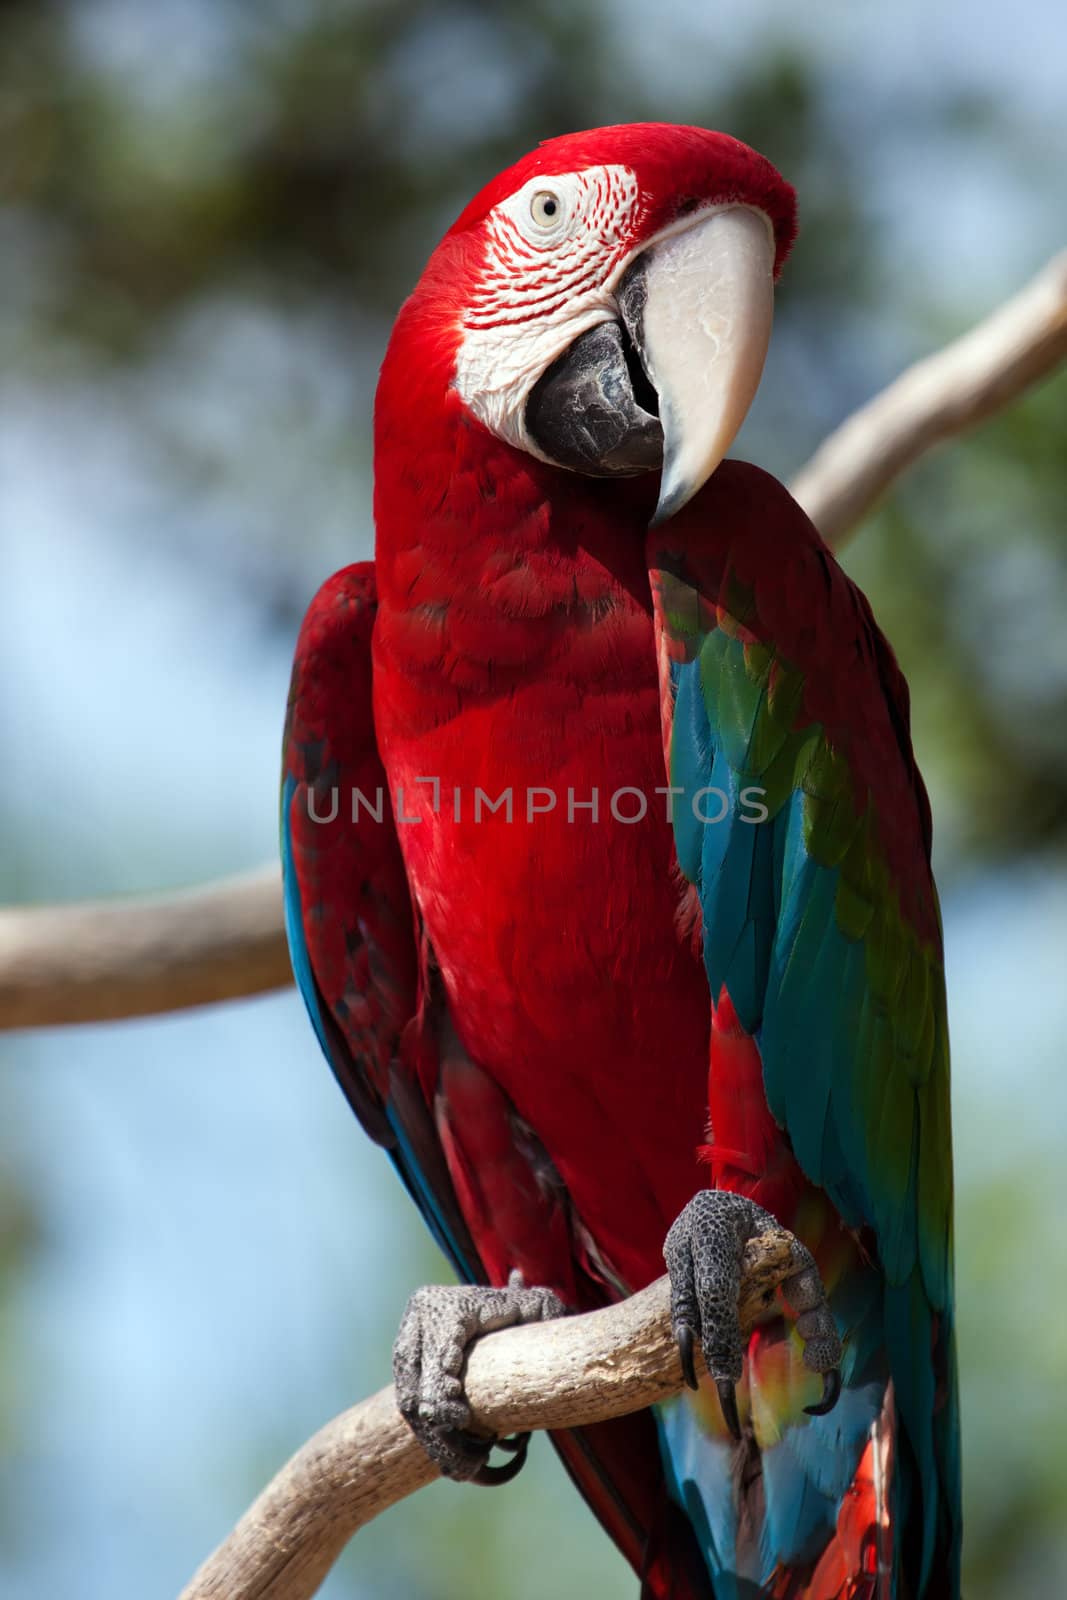 Red Macaw perched on a tree branch.